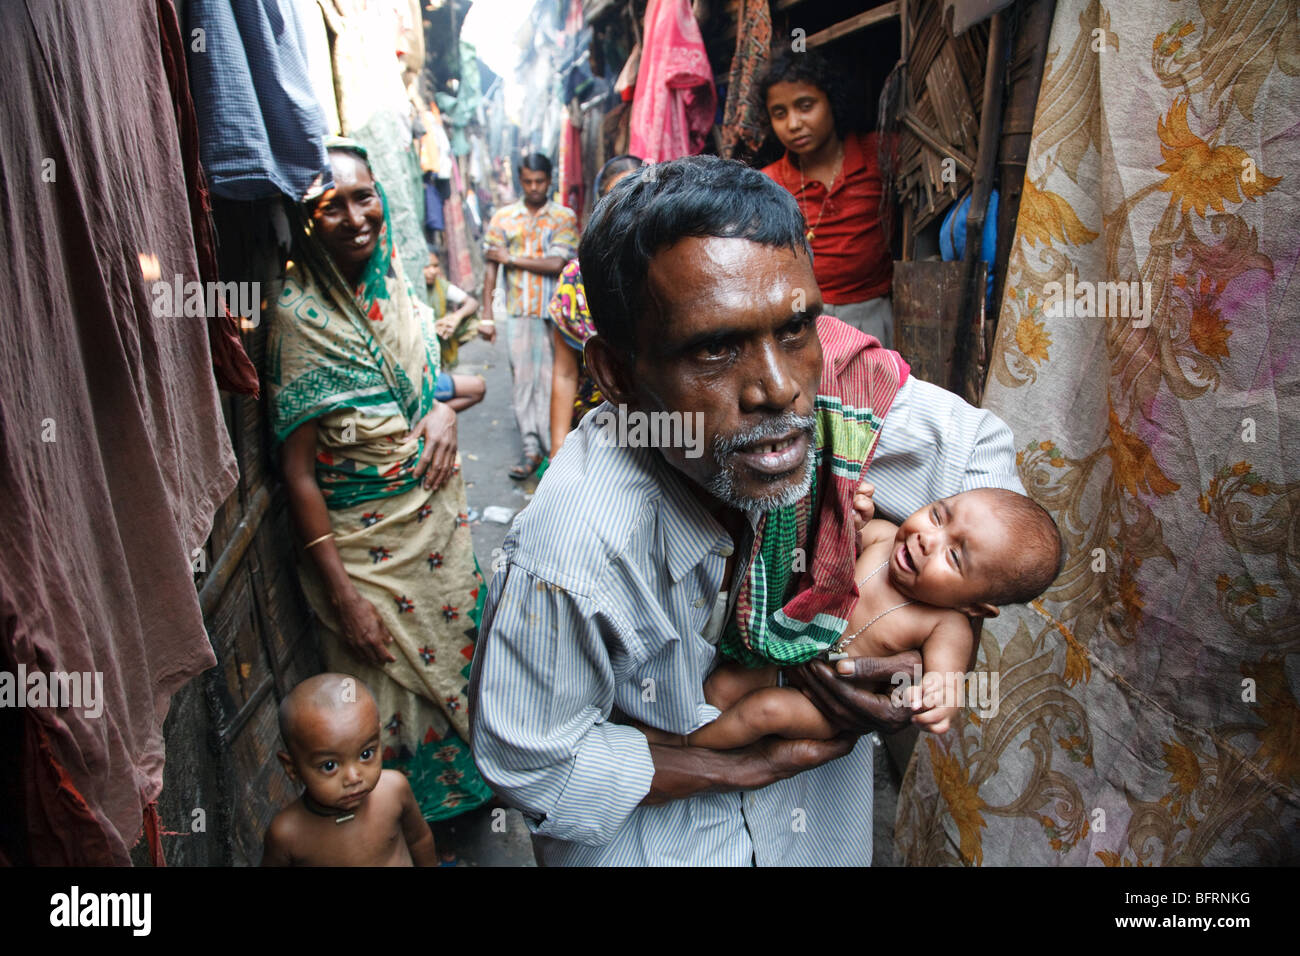 A scene from a daily life of a family living in one of the slums in Kolkata, India Stock Photo